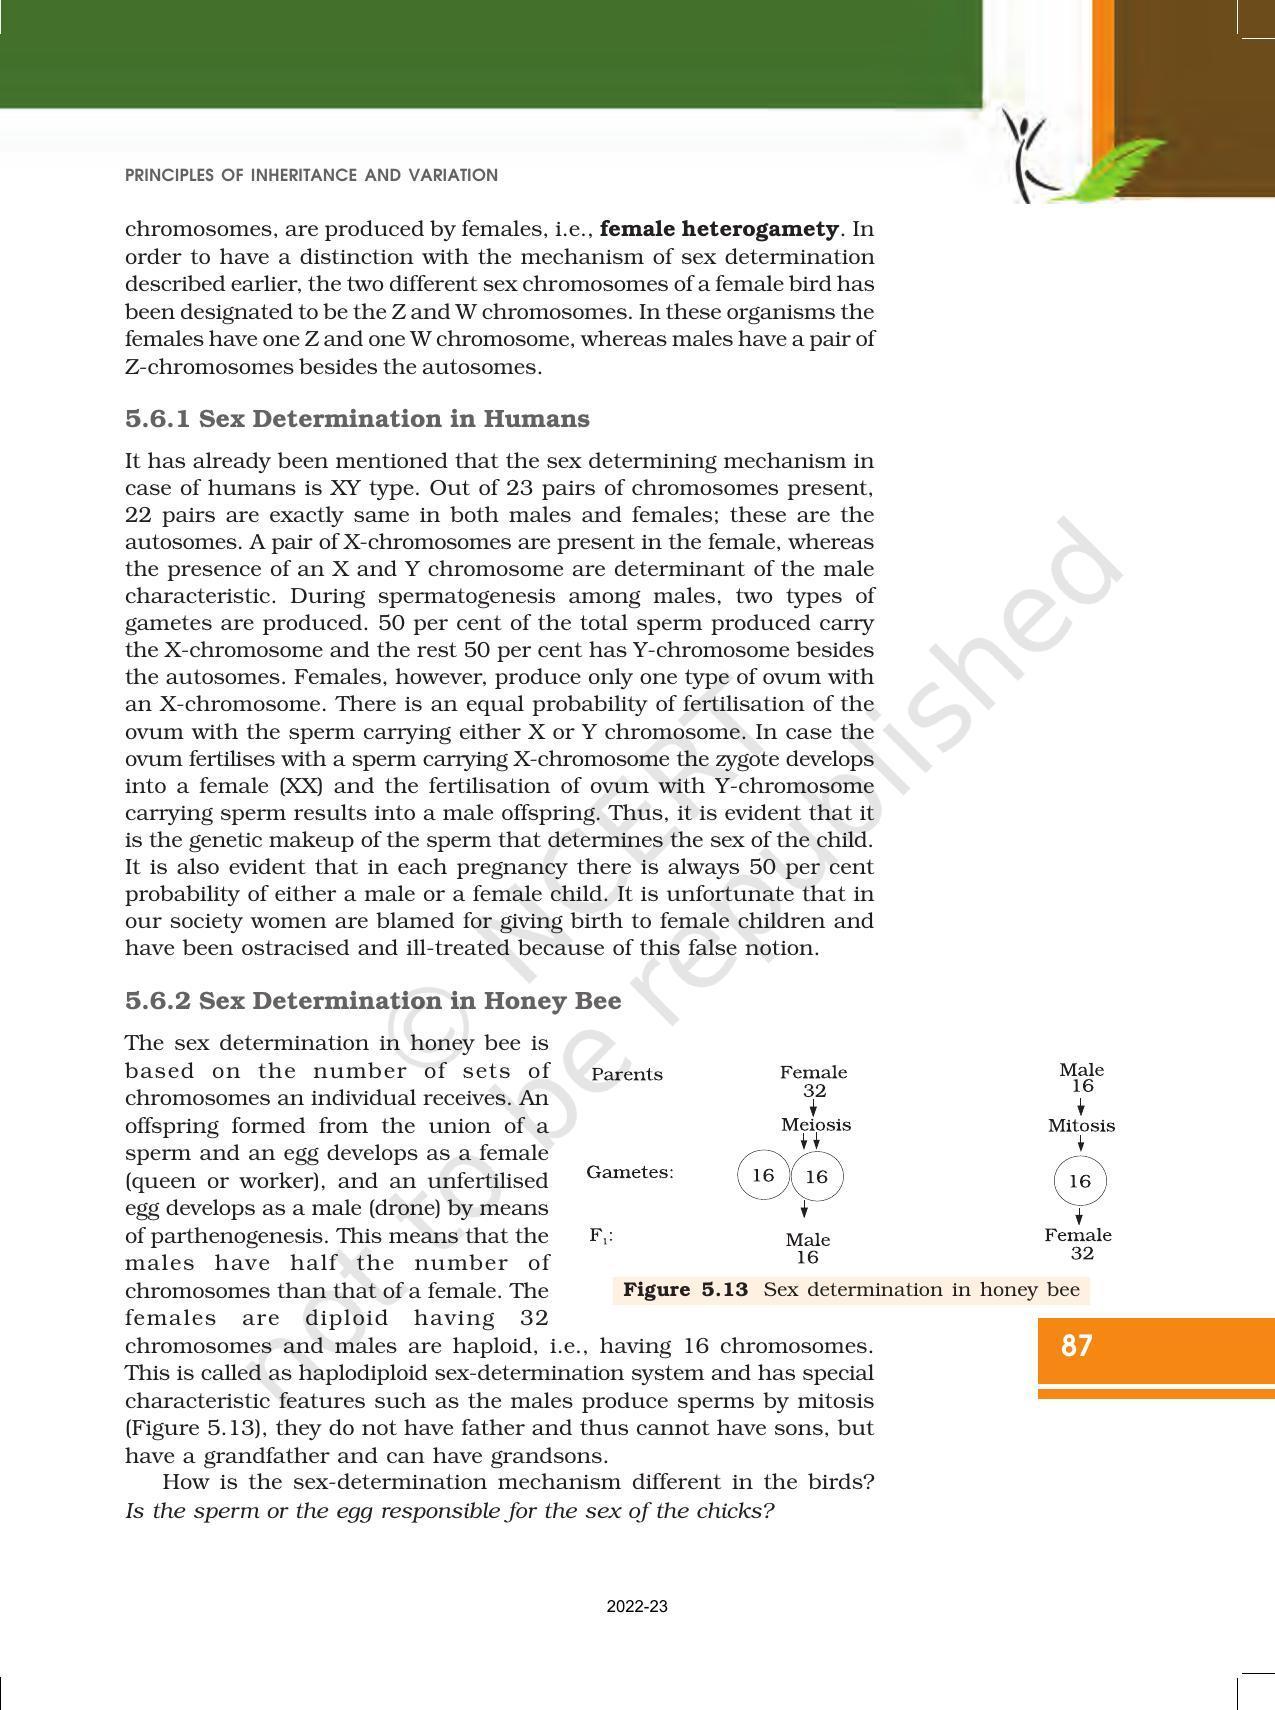 NCERT Book for Class 12 Biology Chapter 5 Principles of Inheritance and Variation - Page 21